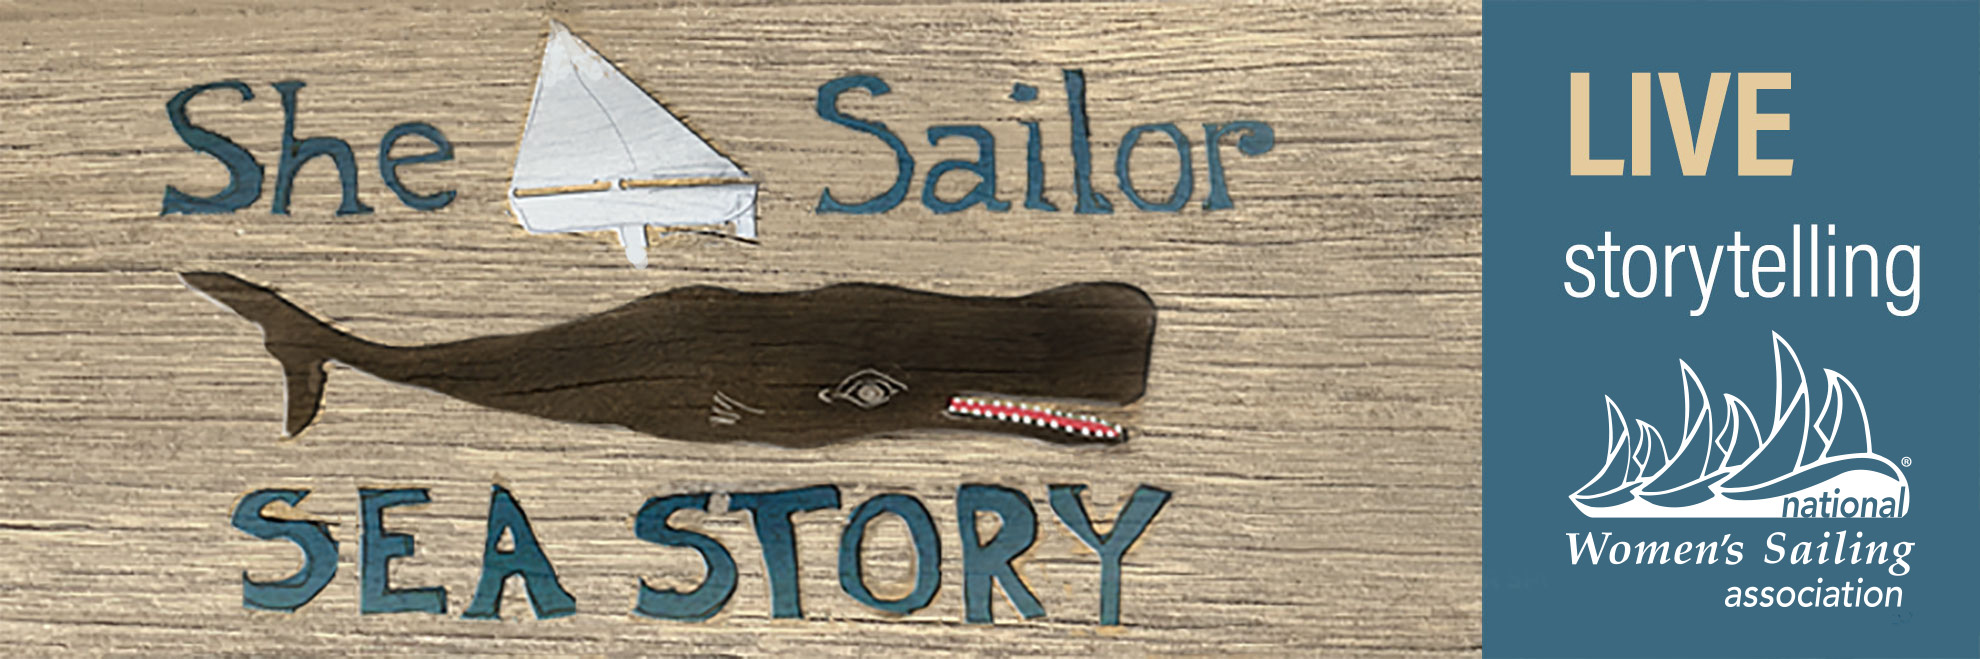 She Sailor Sea Story March 25 NWSA